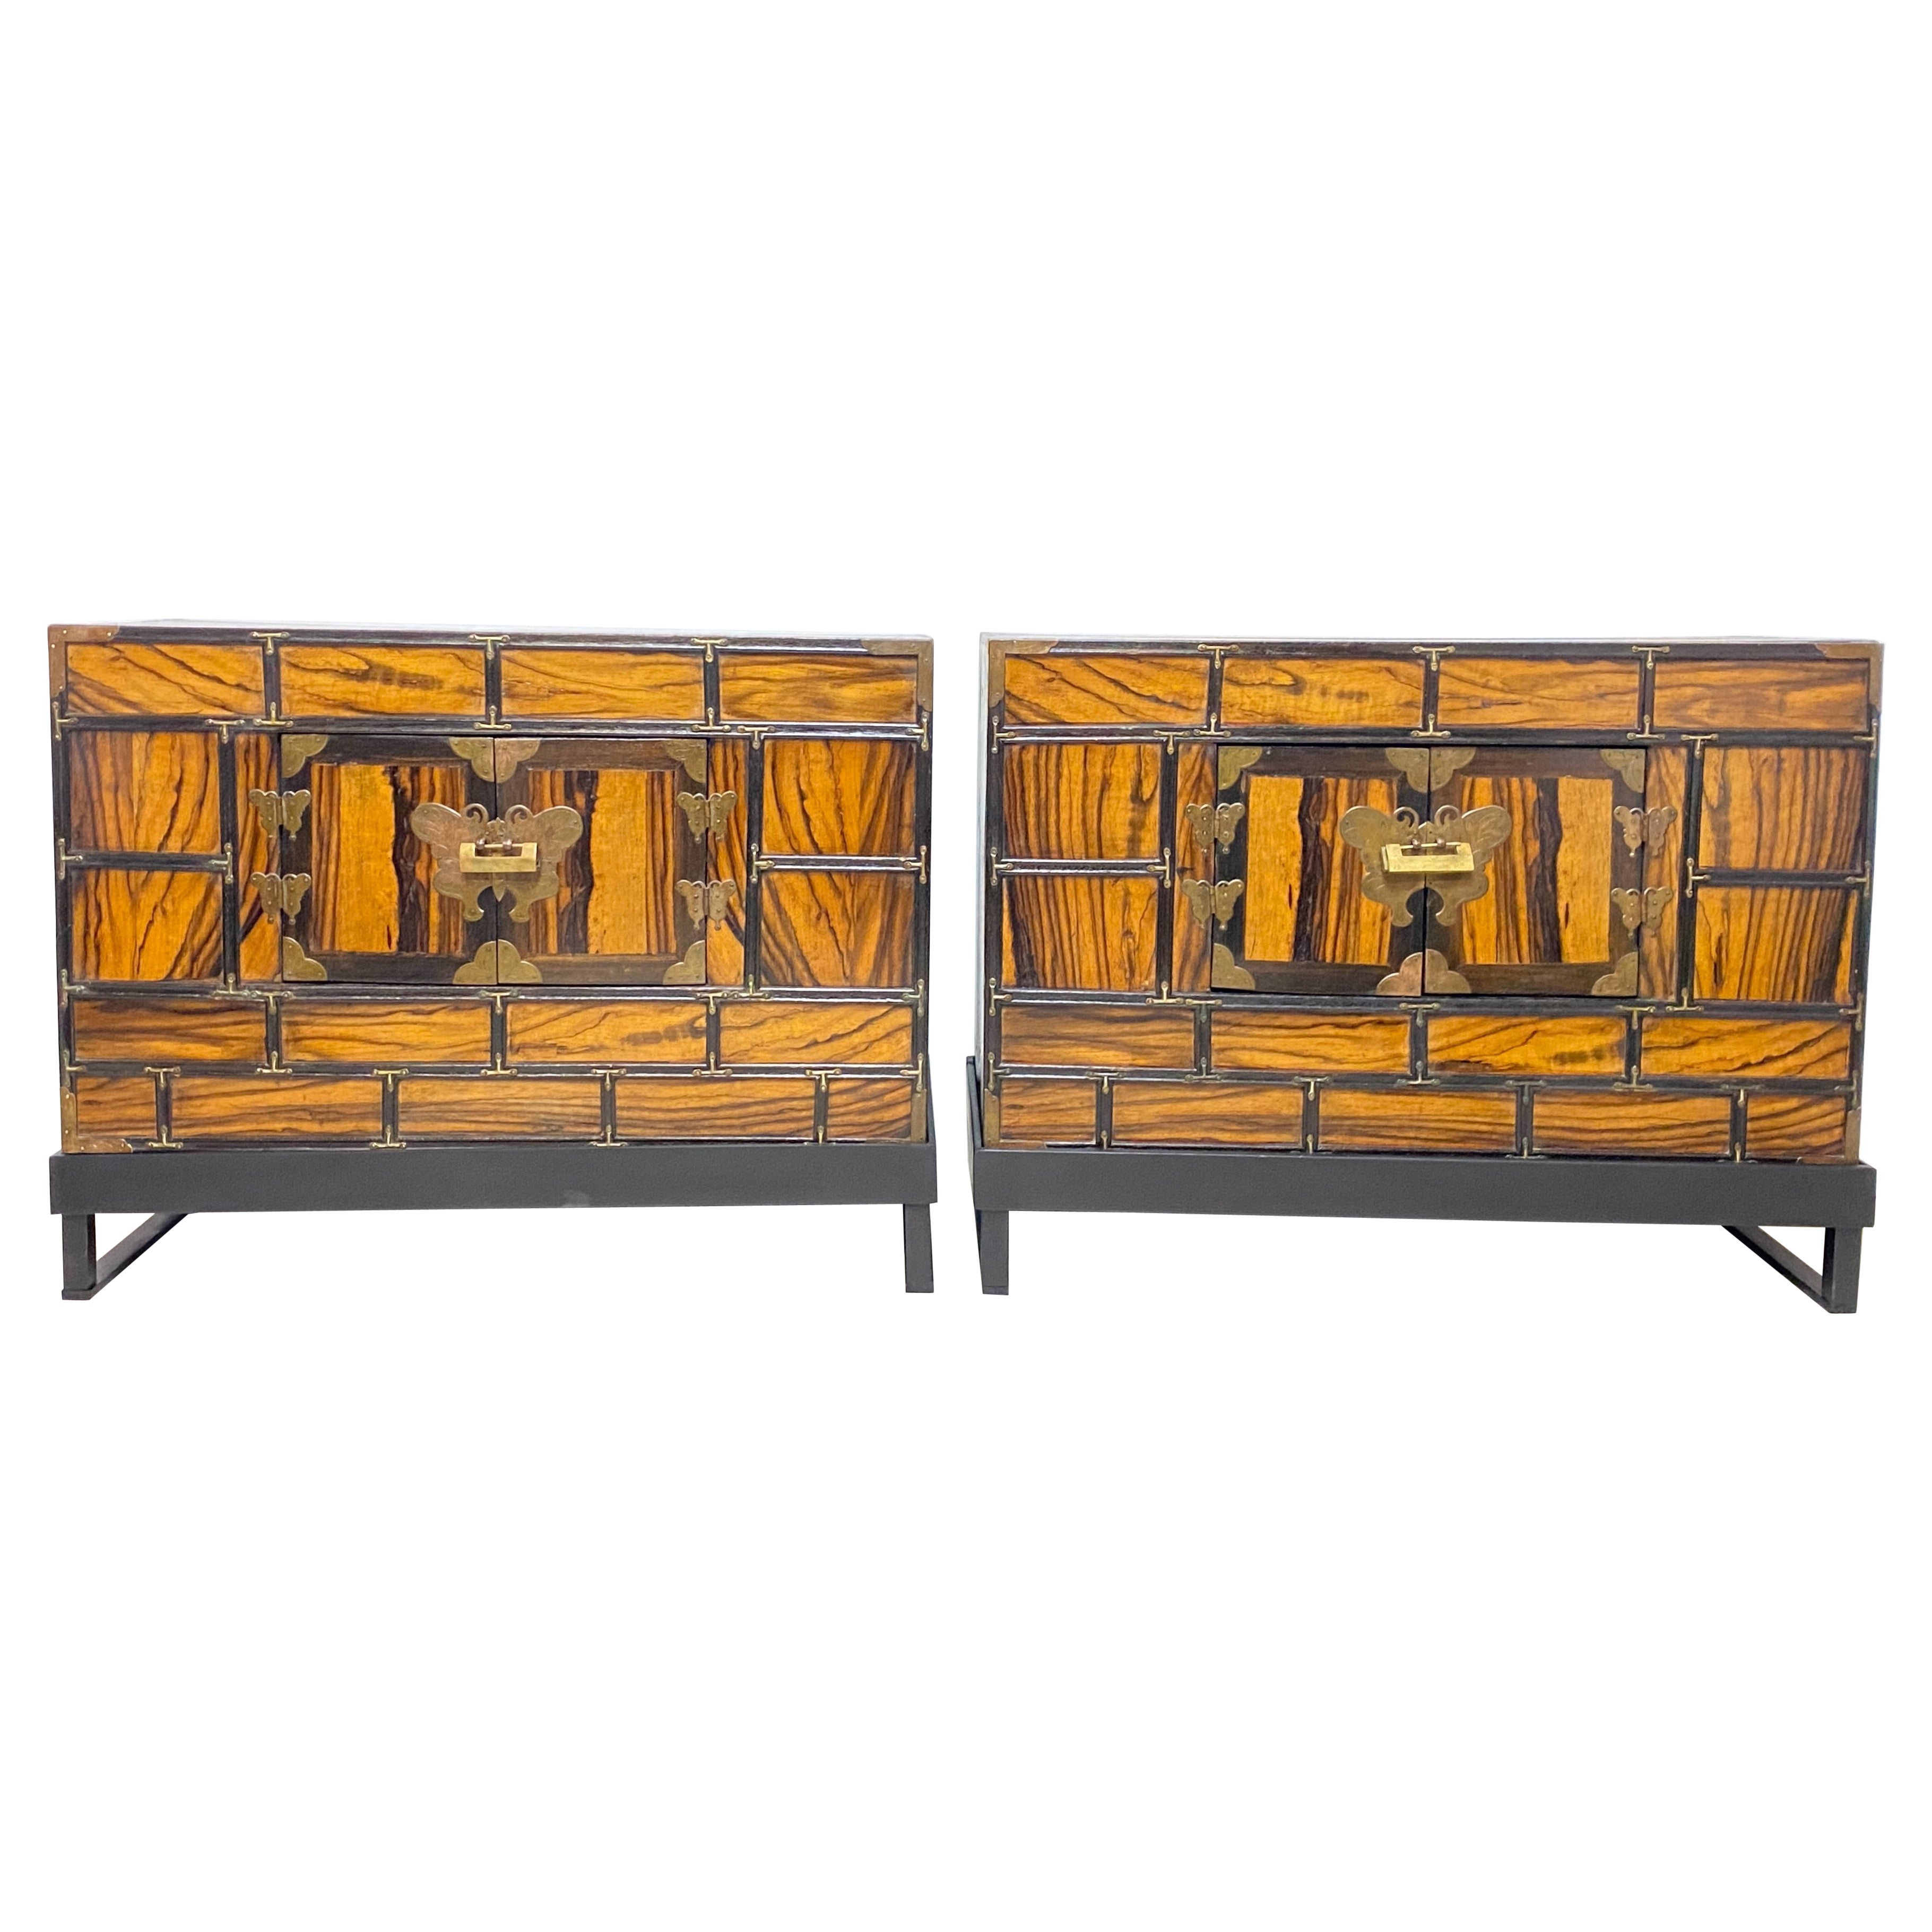 Pair Antique Thai Persimmon Wood and Pine Bed Side Tables / Pillow Cabinets